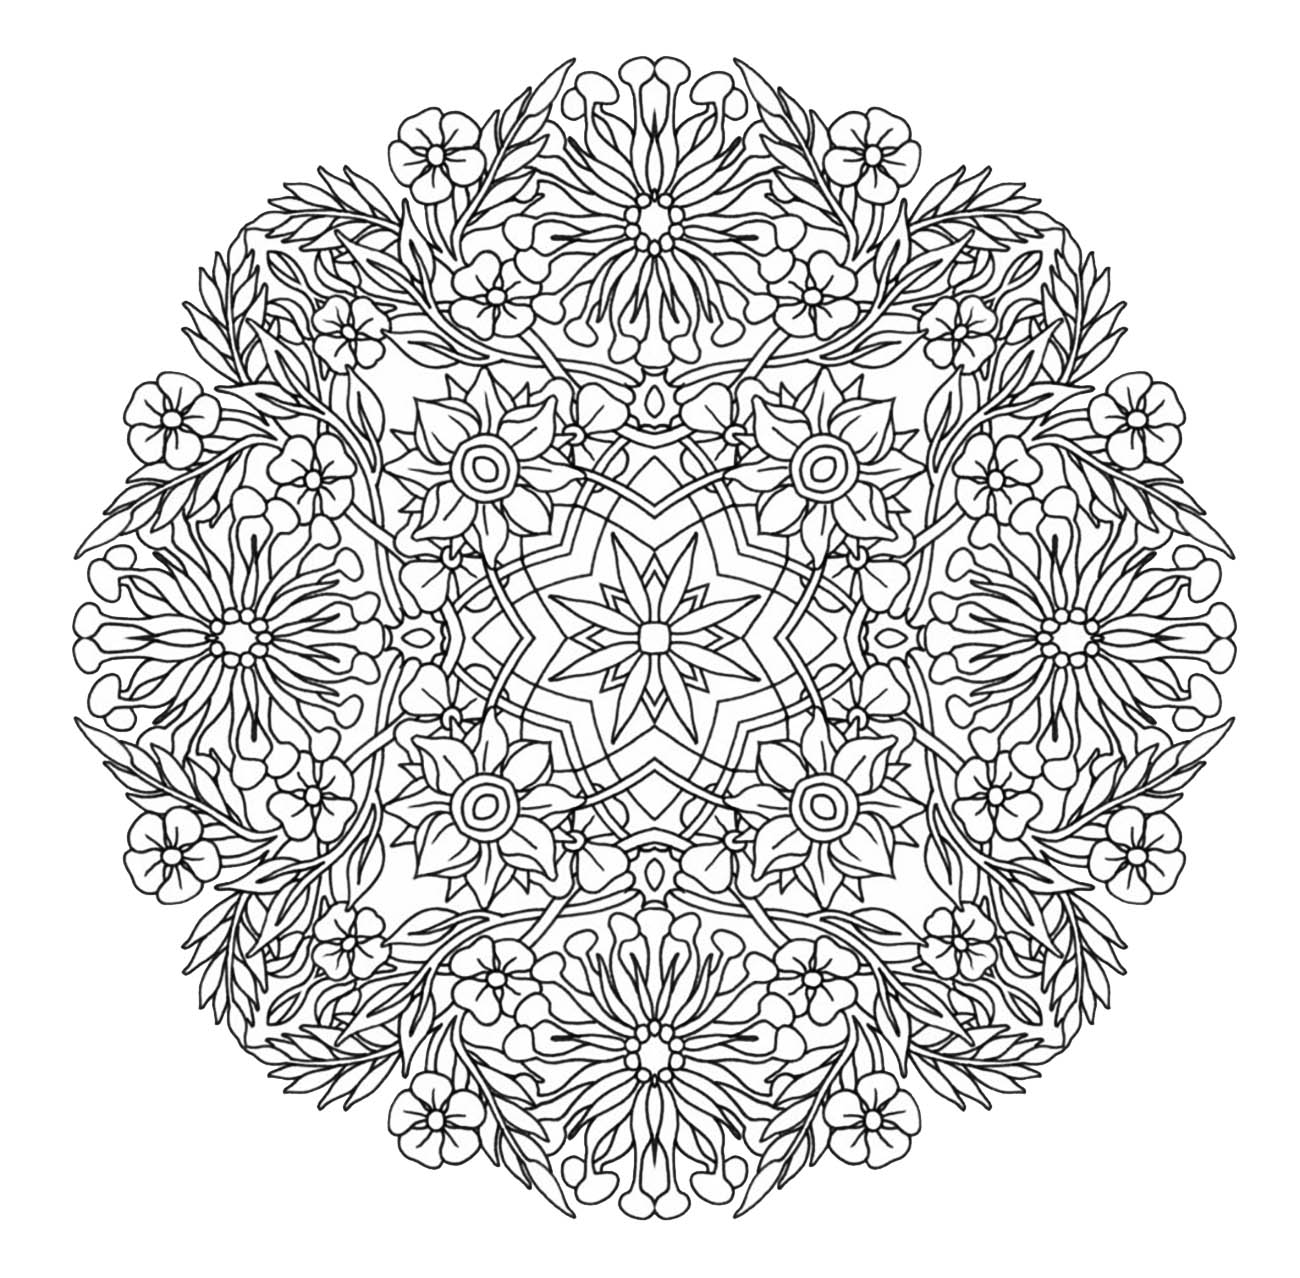 Mandala to download in pdf 9 - M&alas Adult Coloring Pages